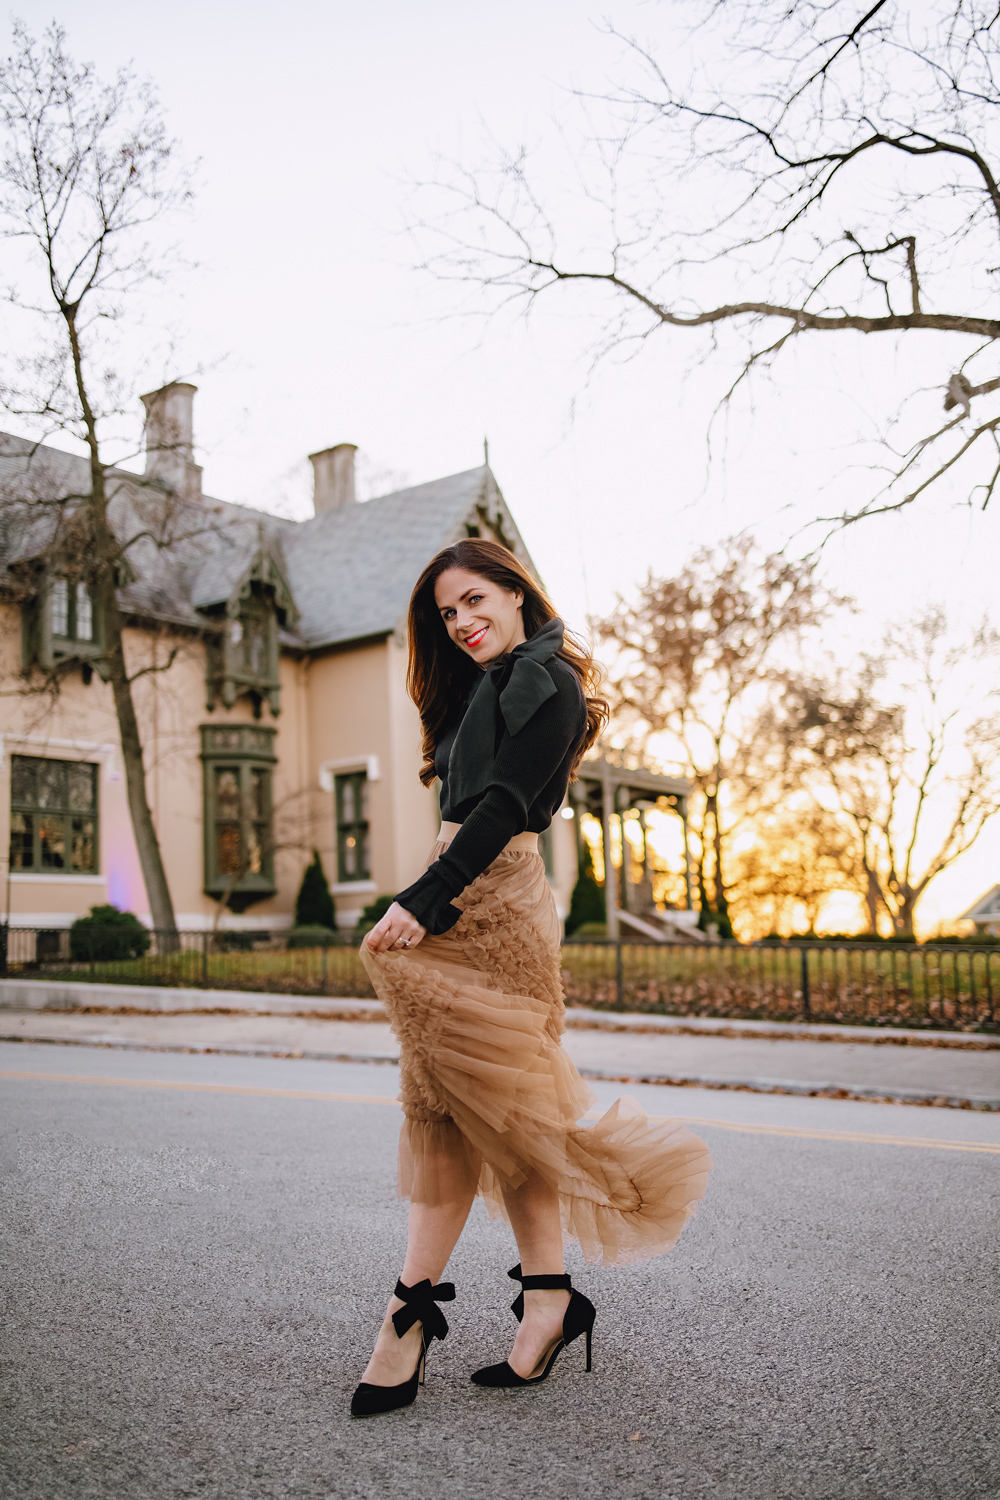 Holiday Party Outfit Ideas That Keep You Warm - Anchored In Elegance